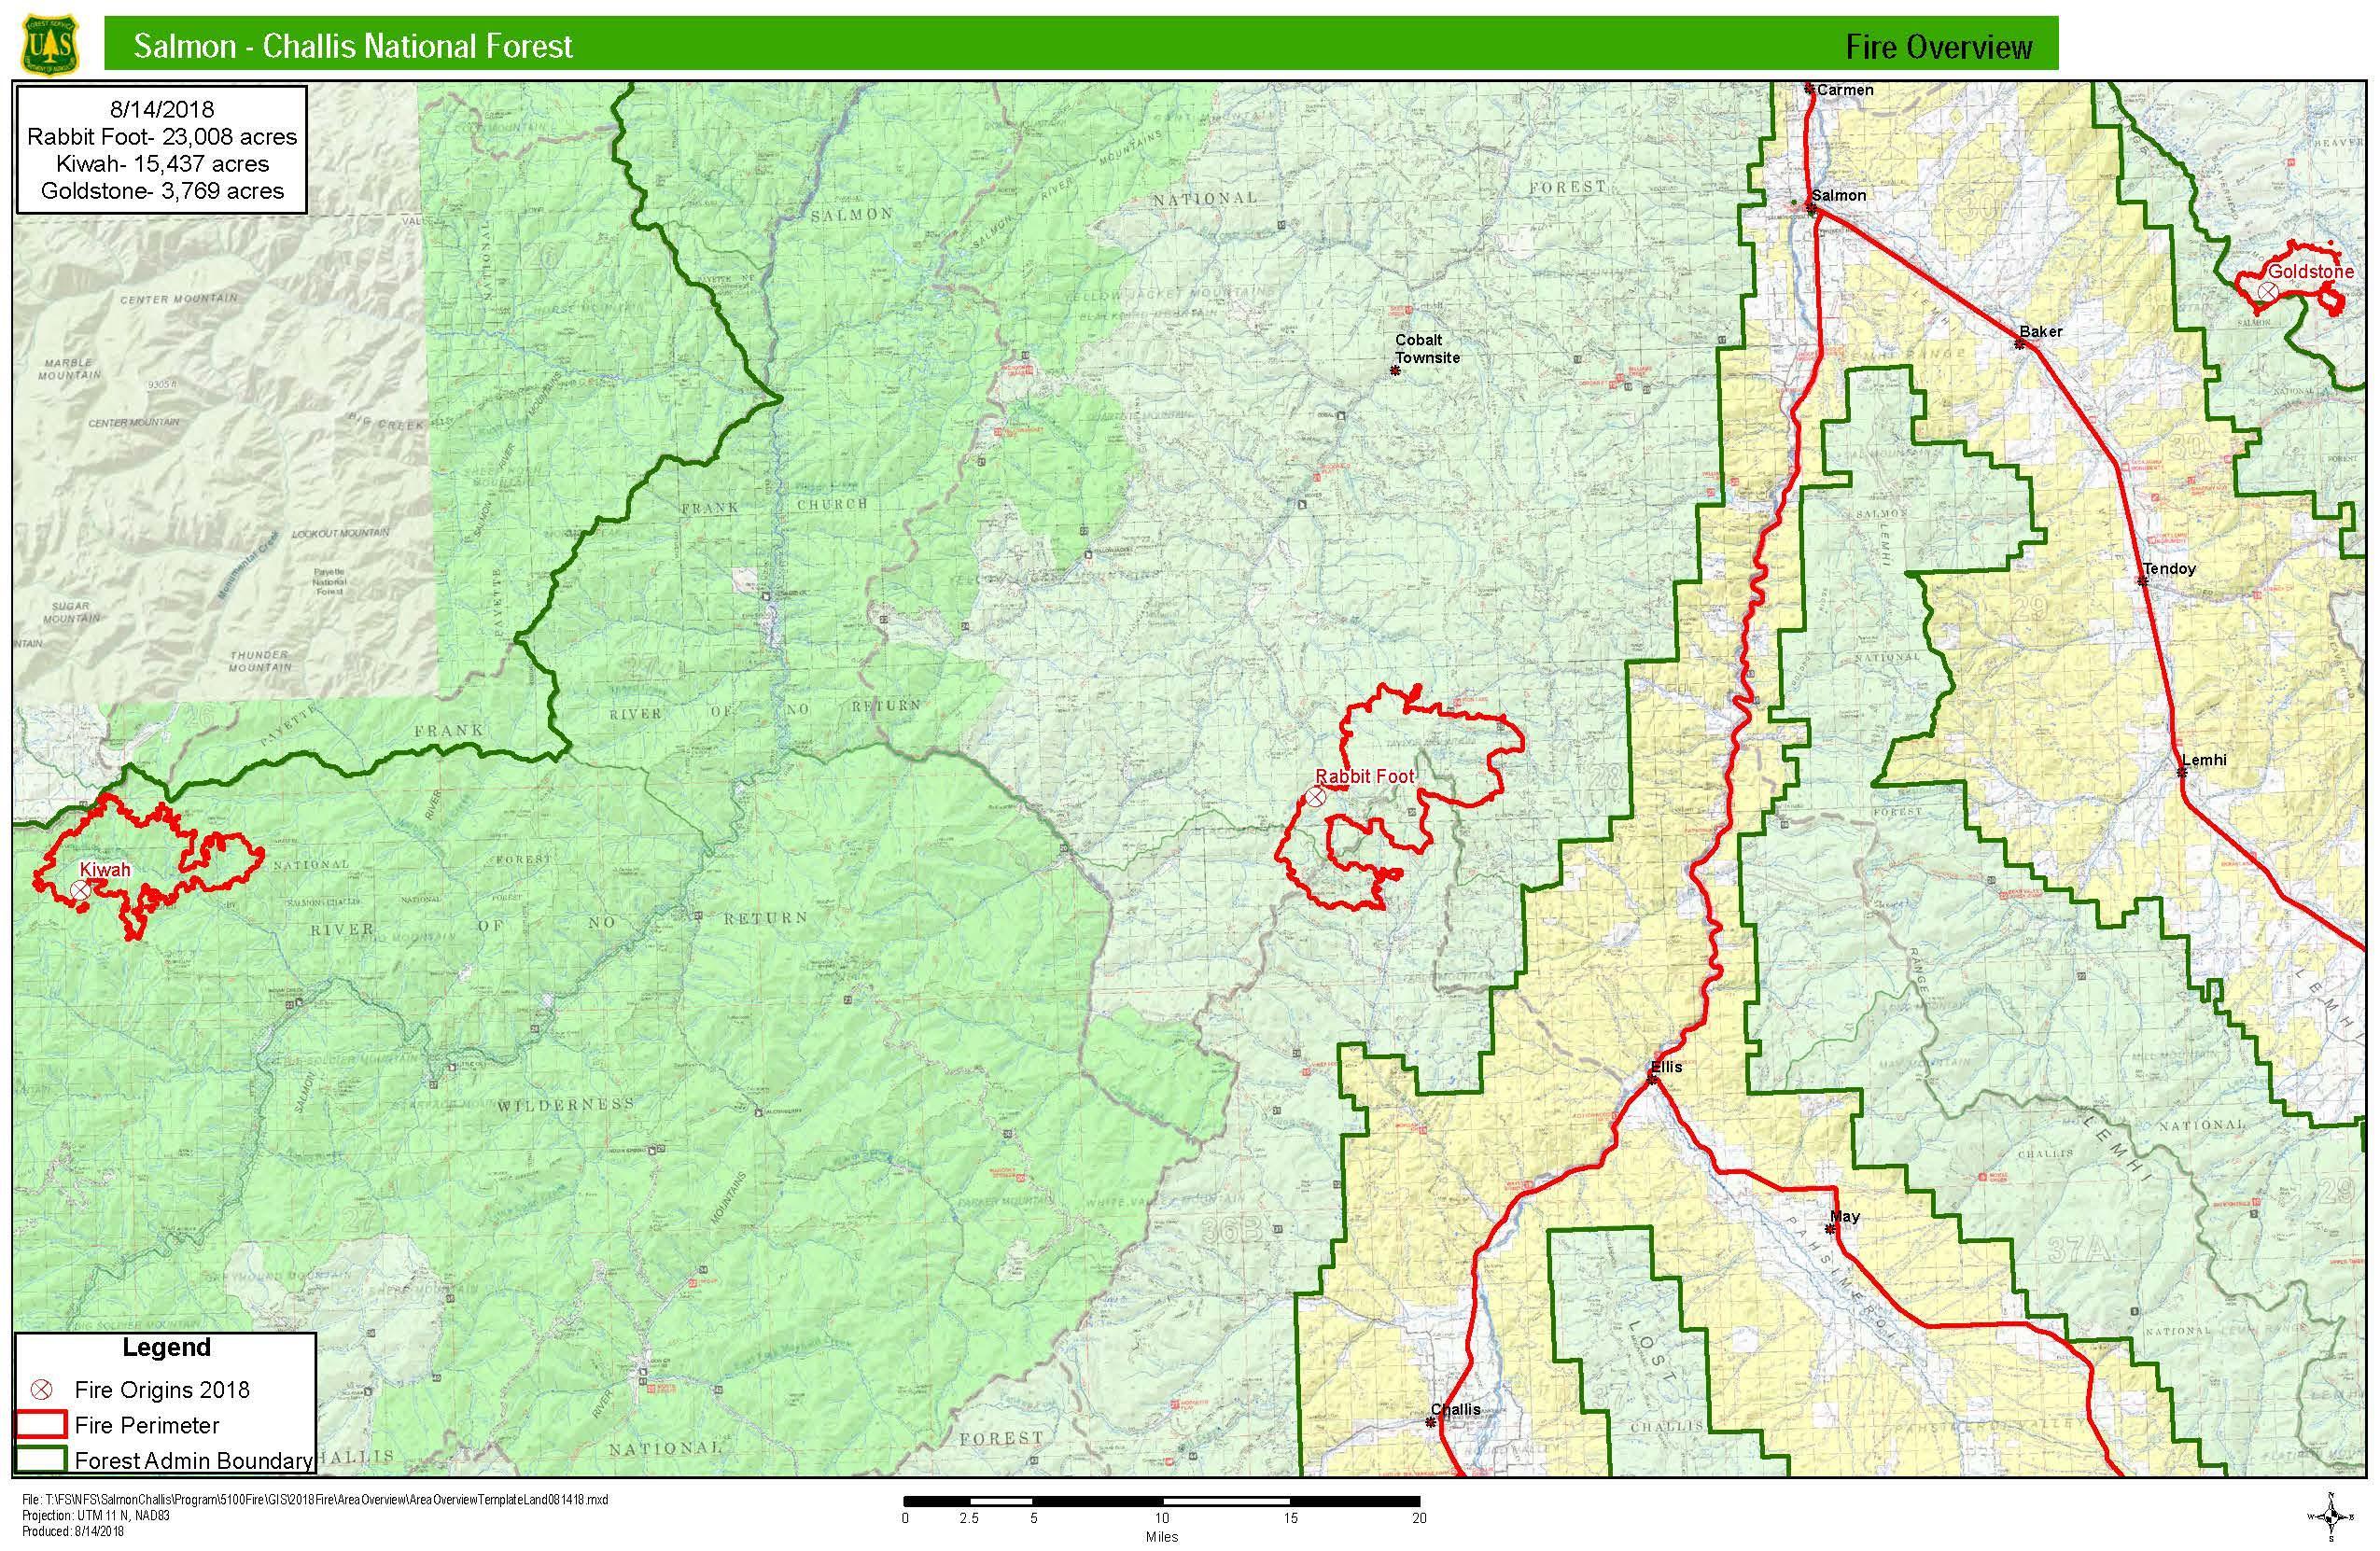 Idaho Fire Map Track Fires Near Me Right Now [August 14]